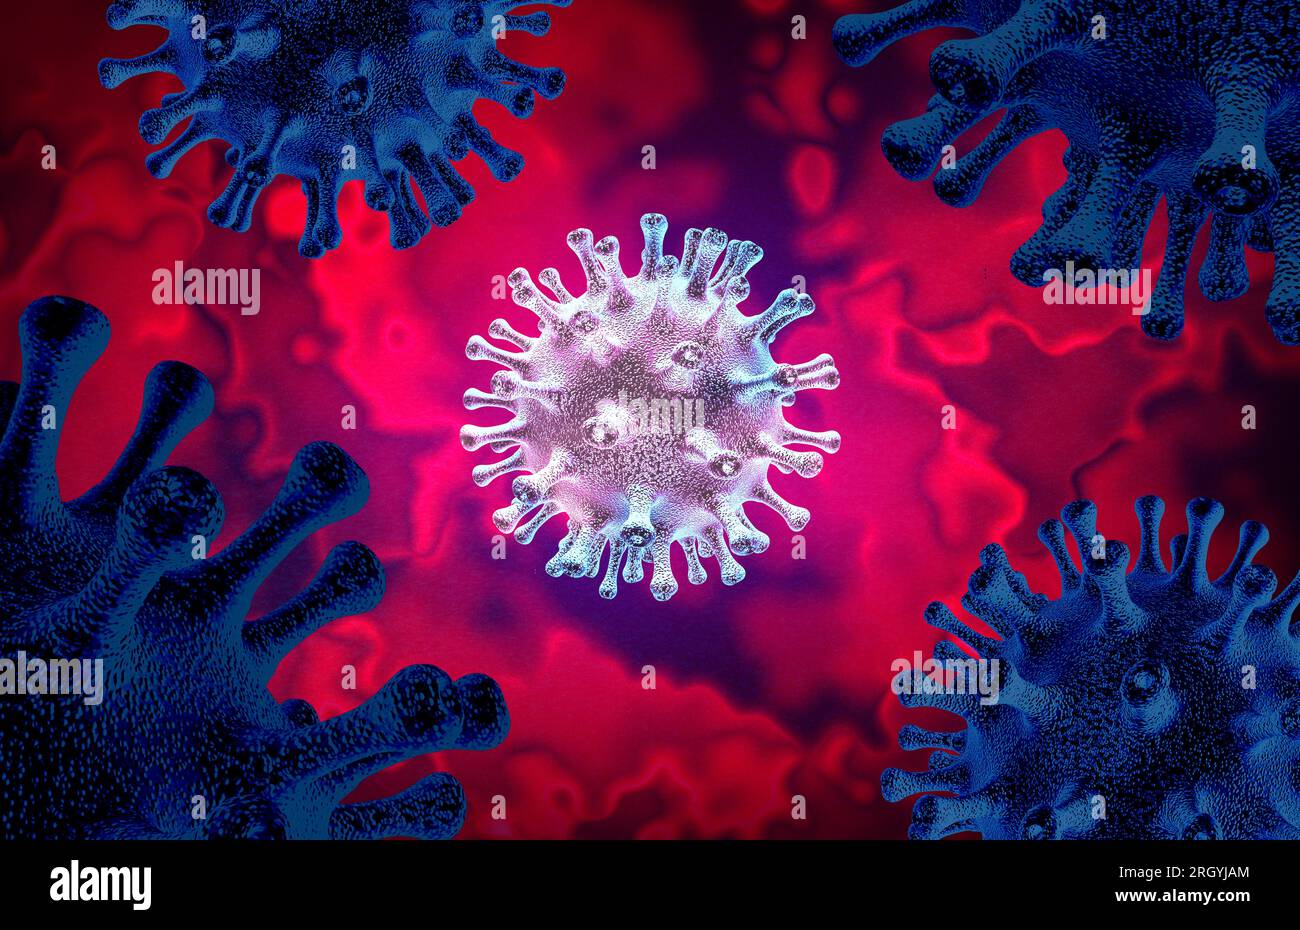 Covid-19 Subvariant and Coronavirus Variant outbreak as a mutating virus concept and new EG.5 viral disease pandemic or covid cell and influenza backg Stock Photo